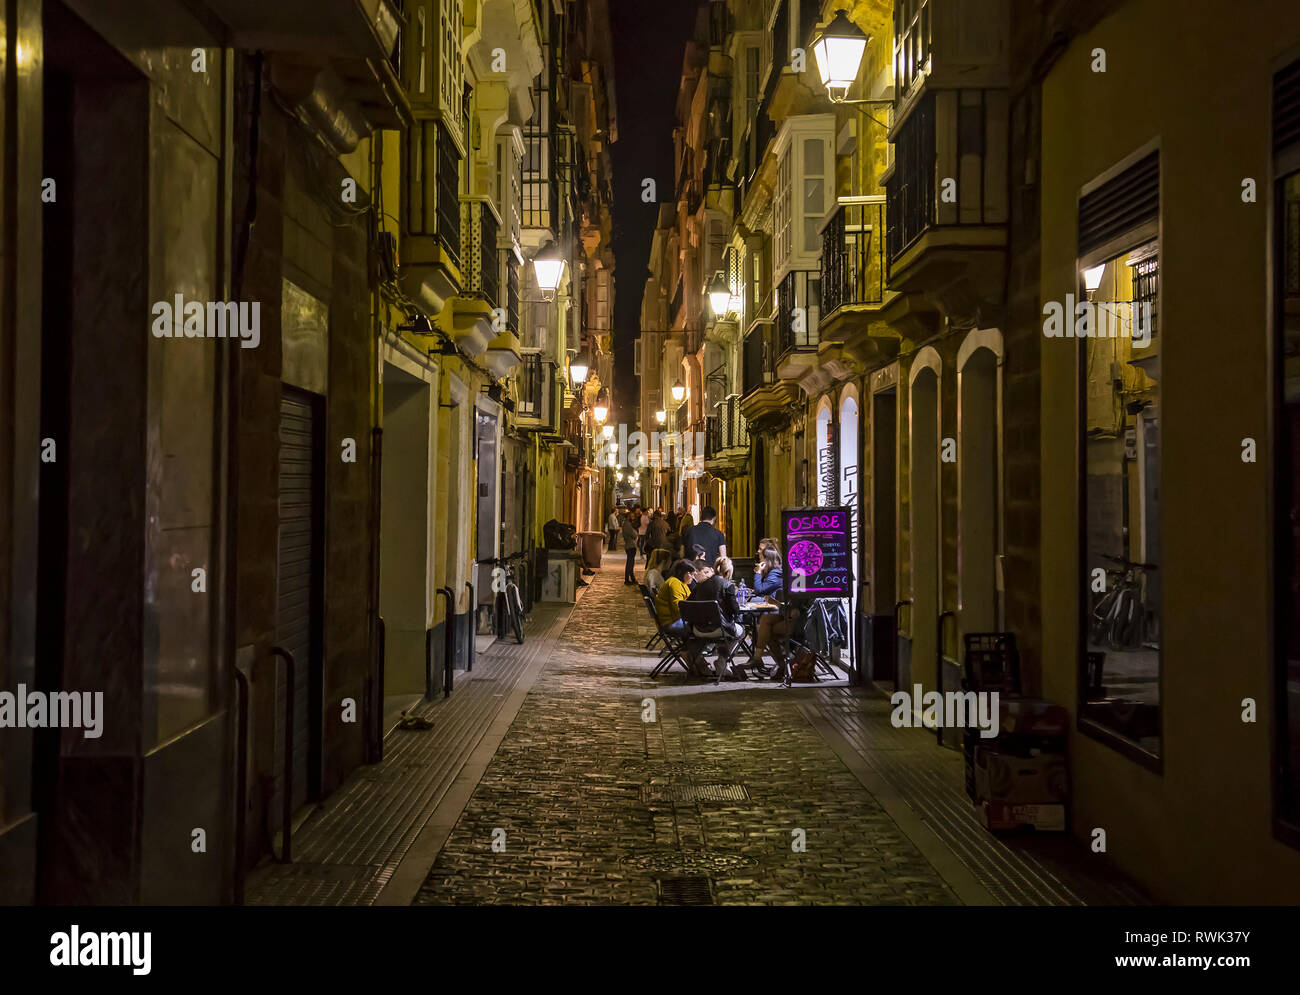 Patrons sit at tables on a patio flooded with light in a quiet, narrow street at night; Cadiz, Andalusia, Spain Stock Photo